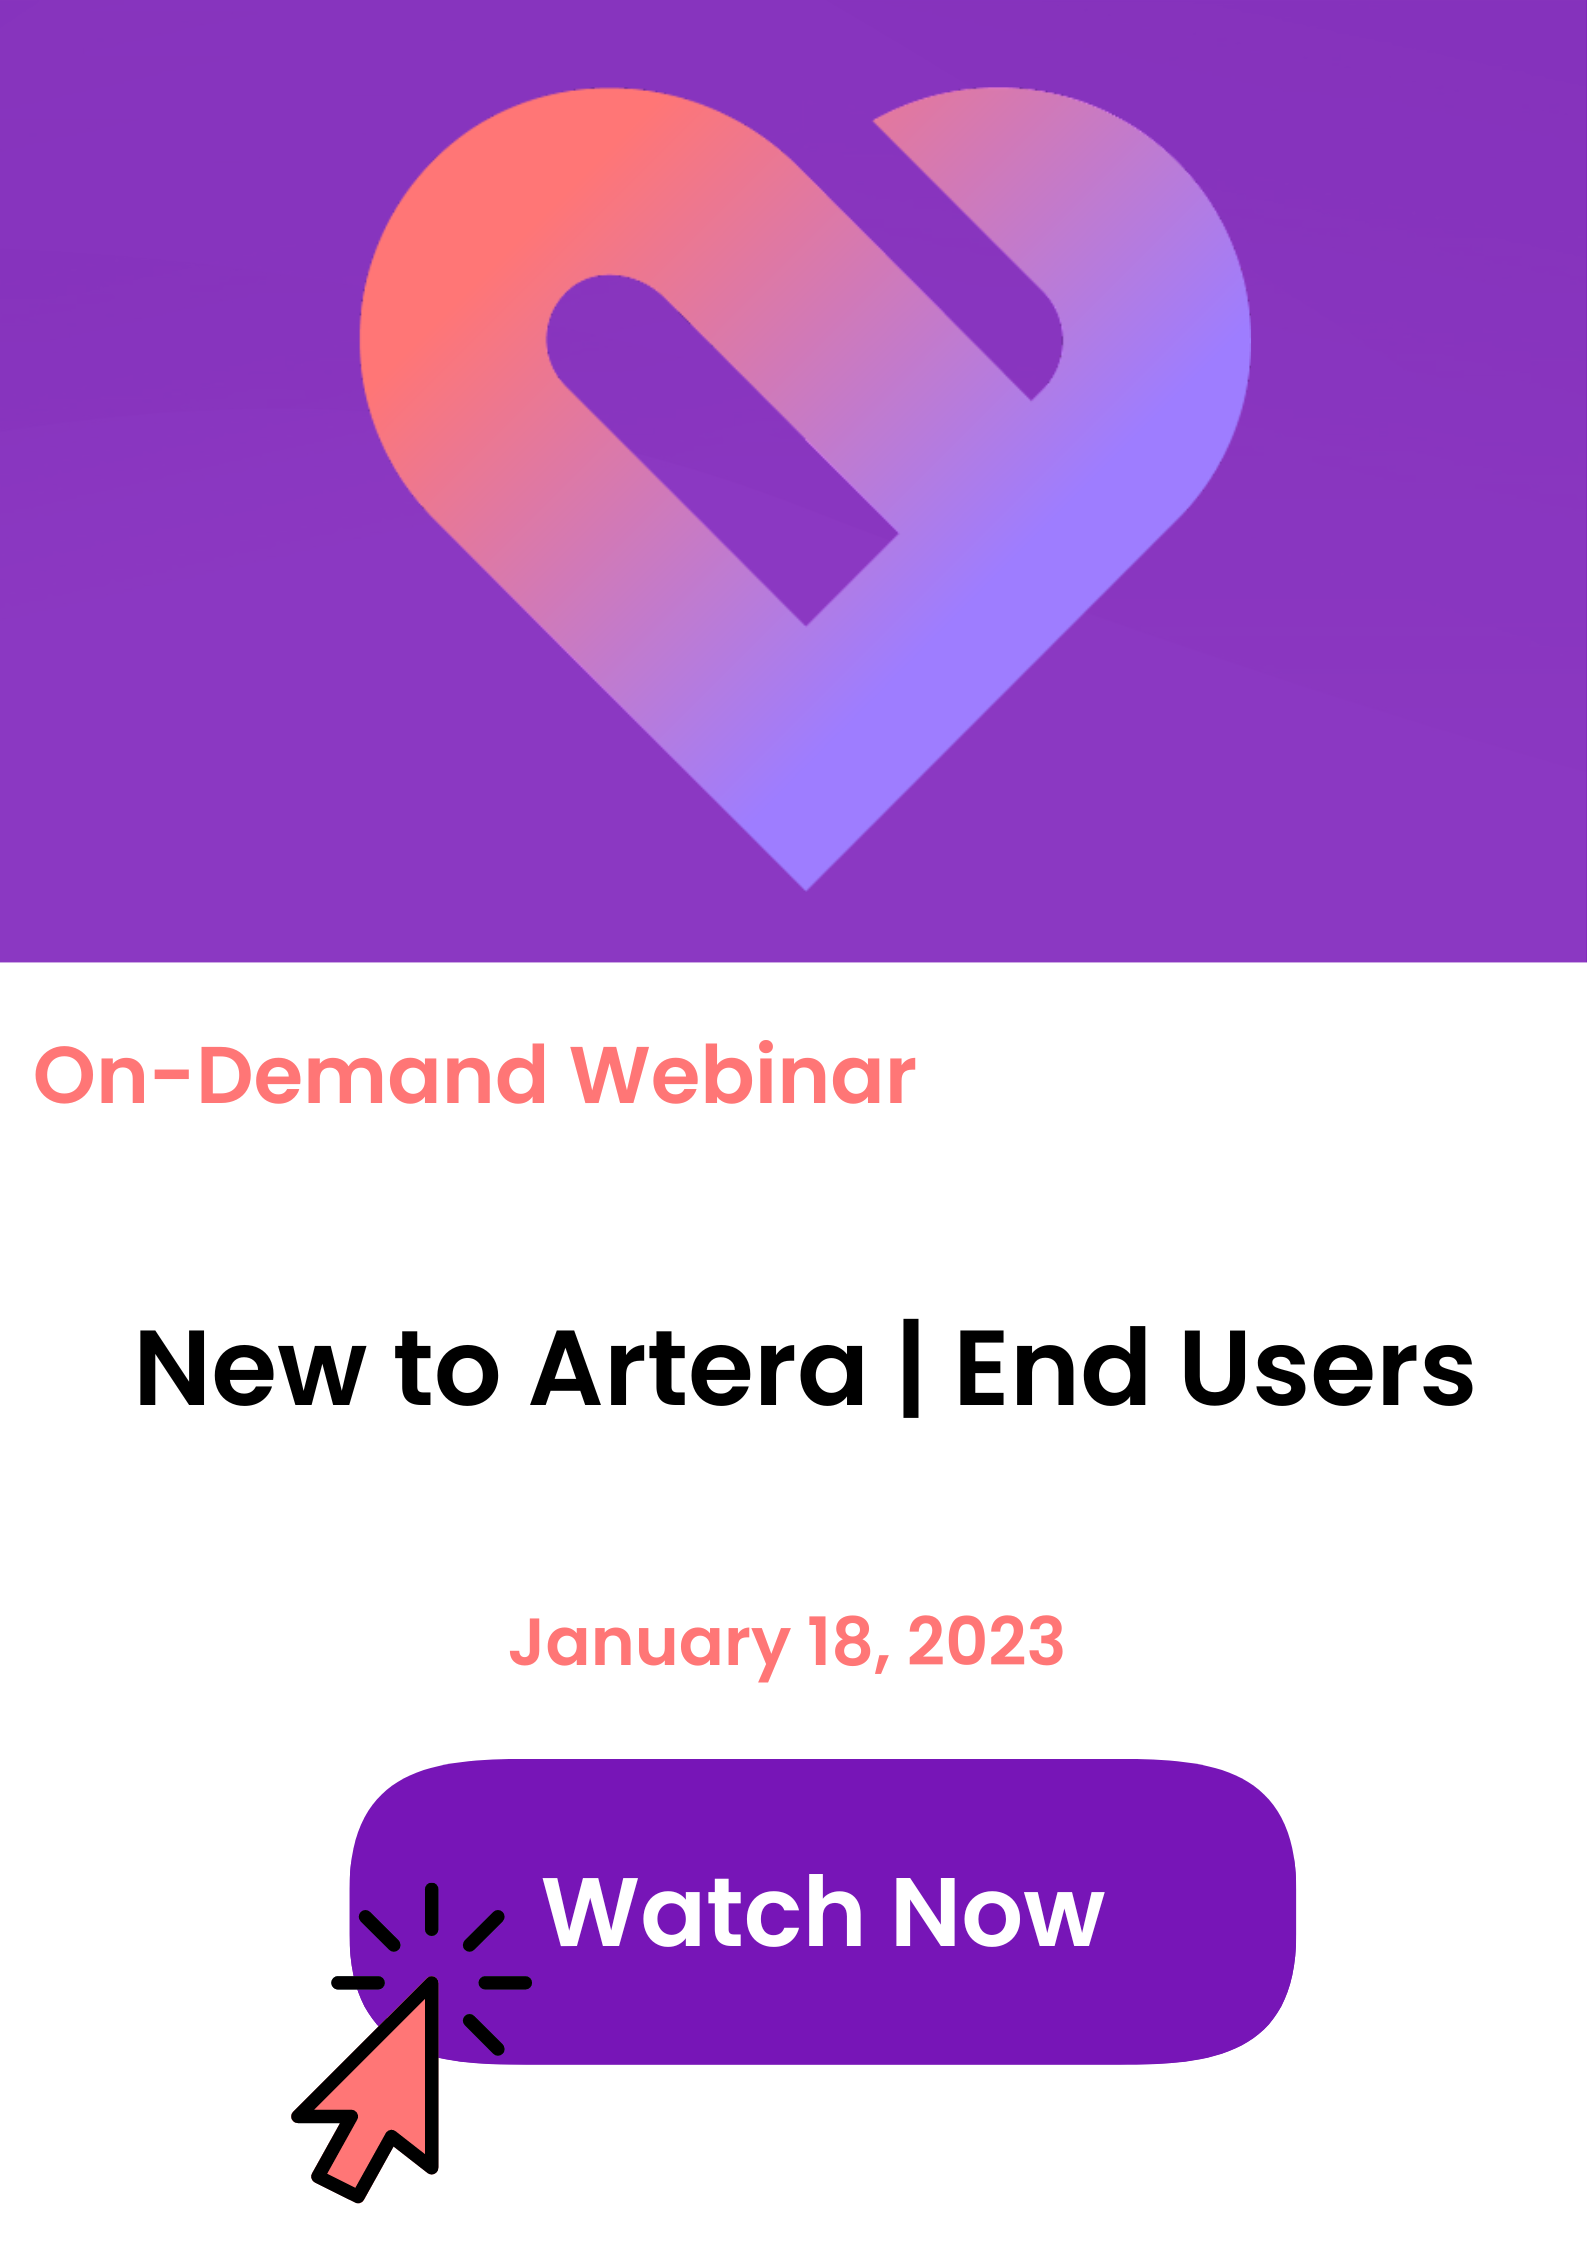 On-demand webinar tile for New to Artera End Users, click to watch now